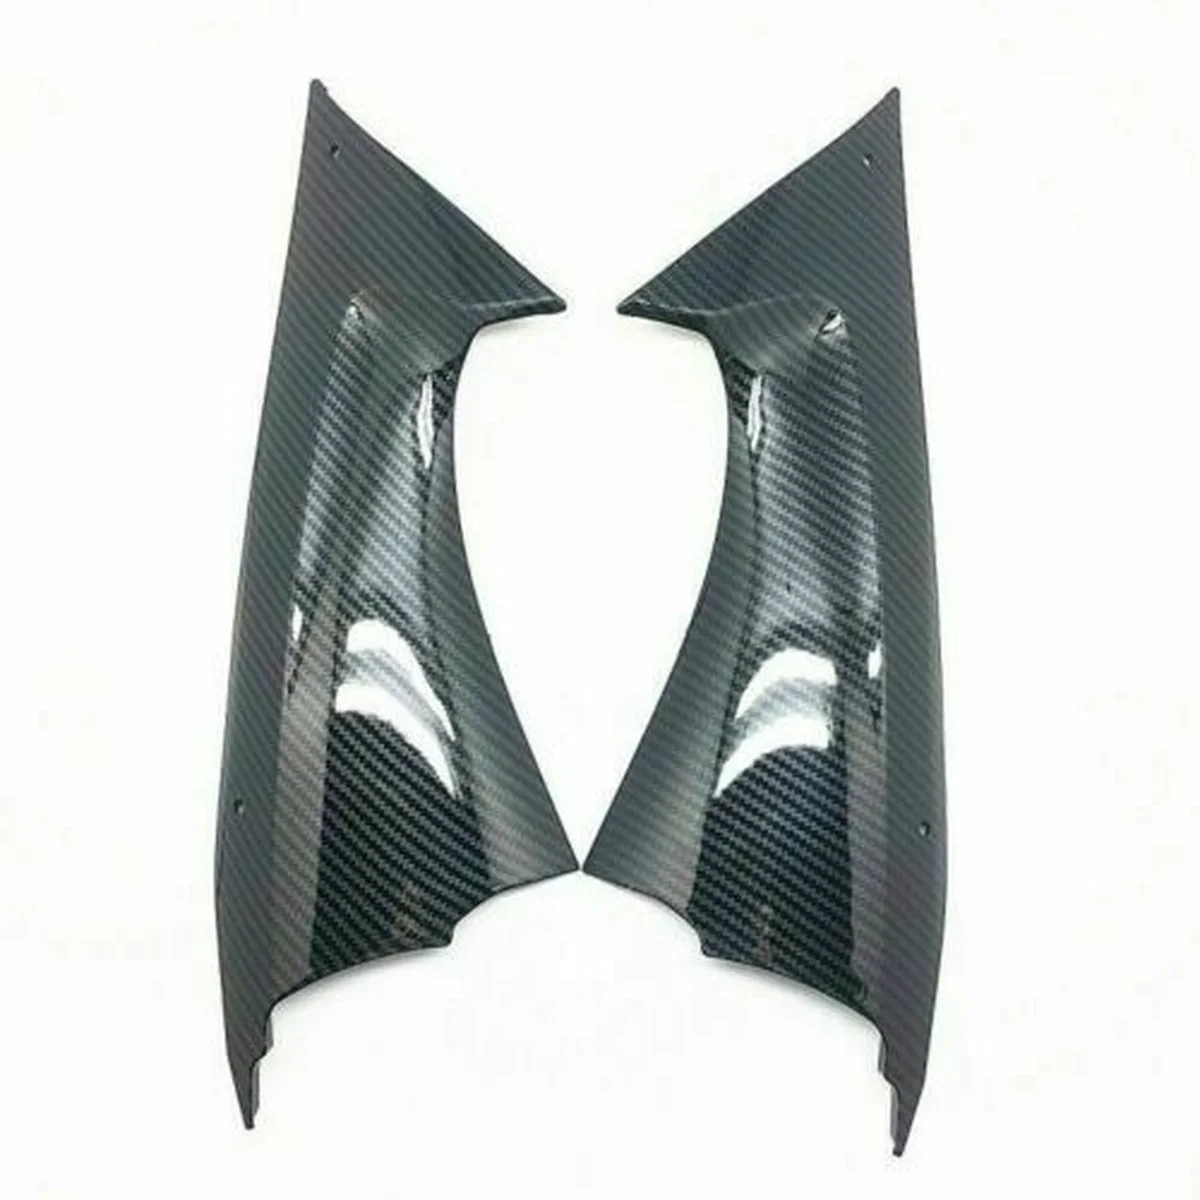 Carbon Fiber Pattern Side Air Duct Cover Fairing Insert Part for Yamaha YZF R6 2008-2016